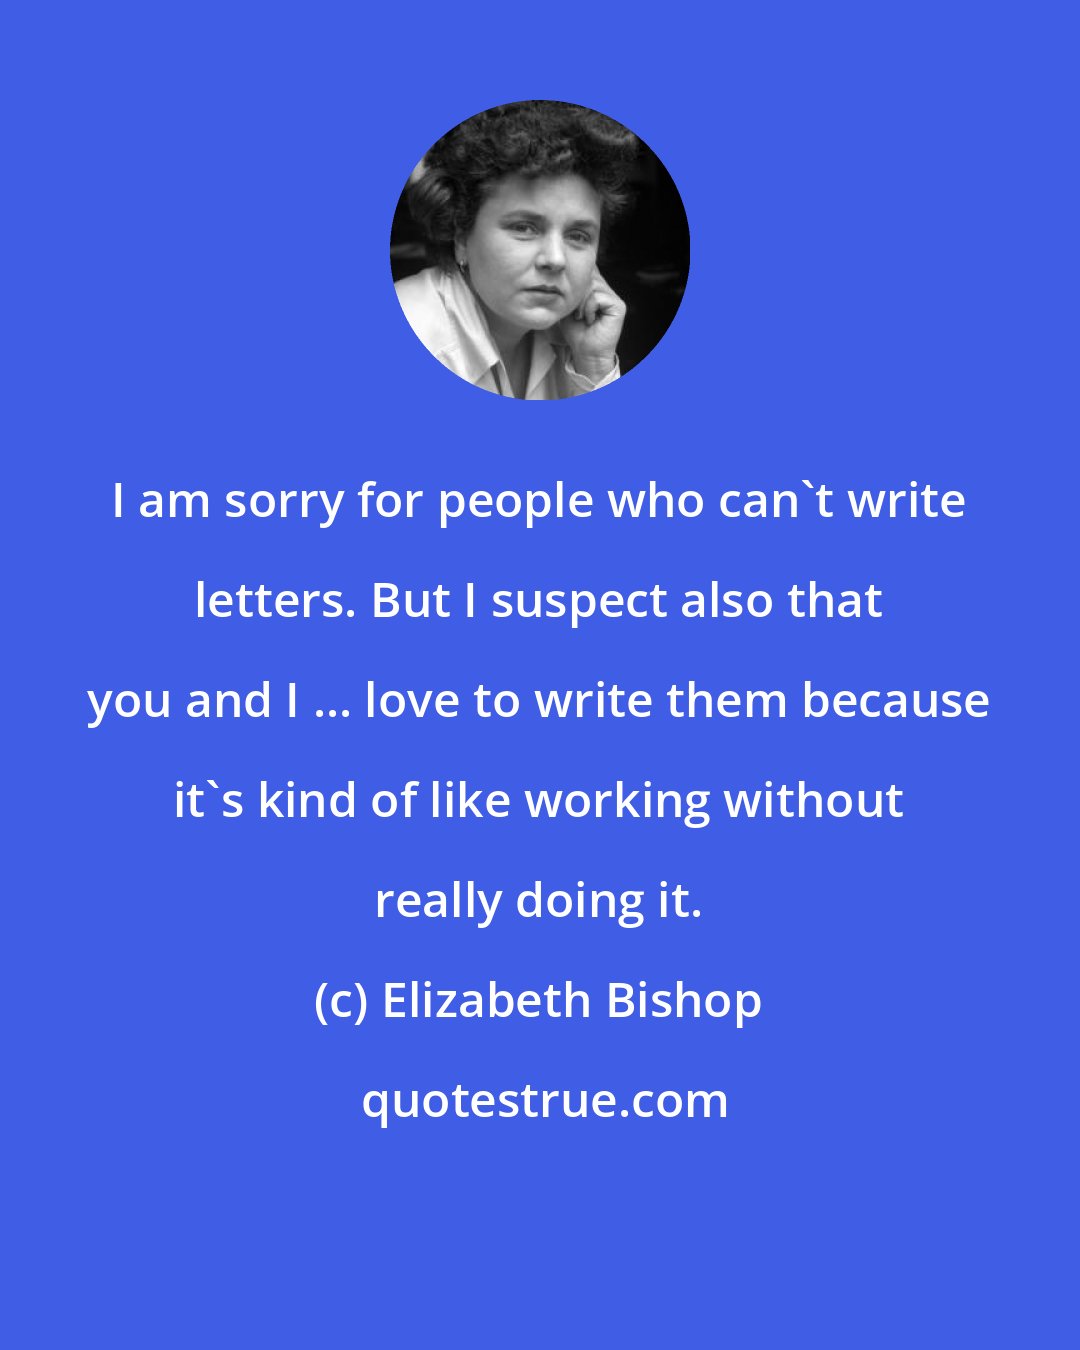 Elizabeth Bishop: I am sorry for people who can't write letters. But I suspect also that you and I ... love to write them because it's kind of like working without really doing it.